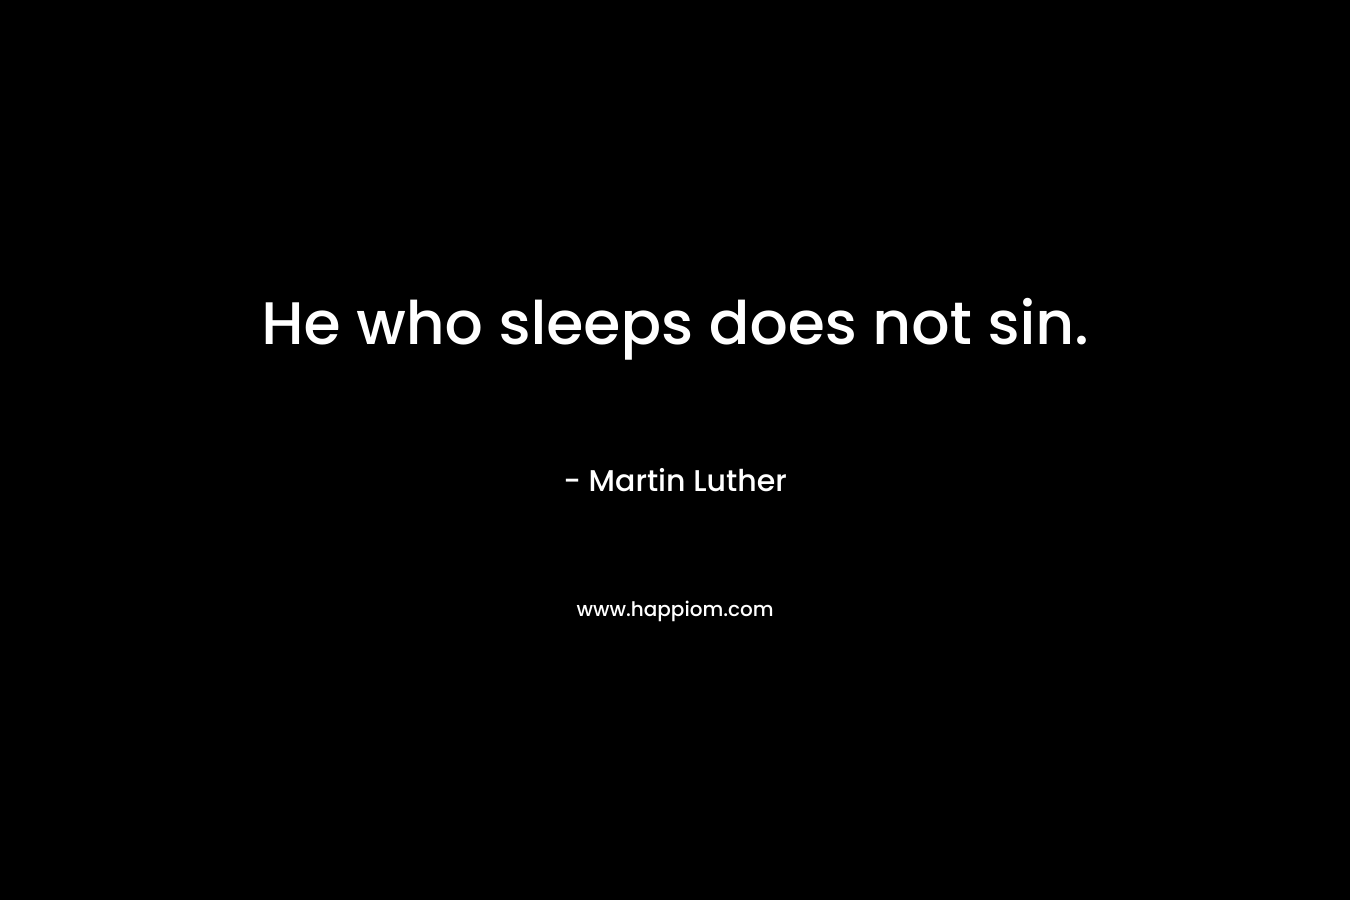 He who sleeps does not sin. – Martin Luther